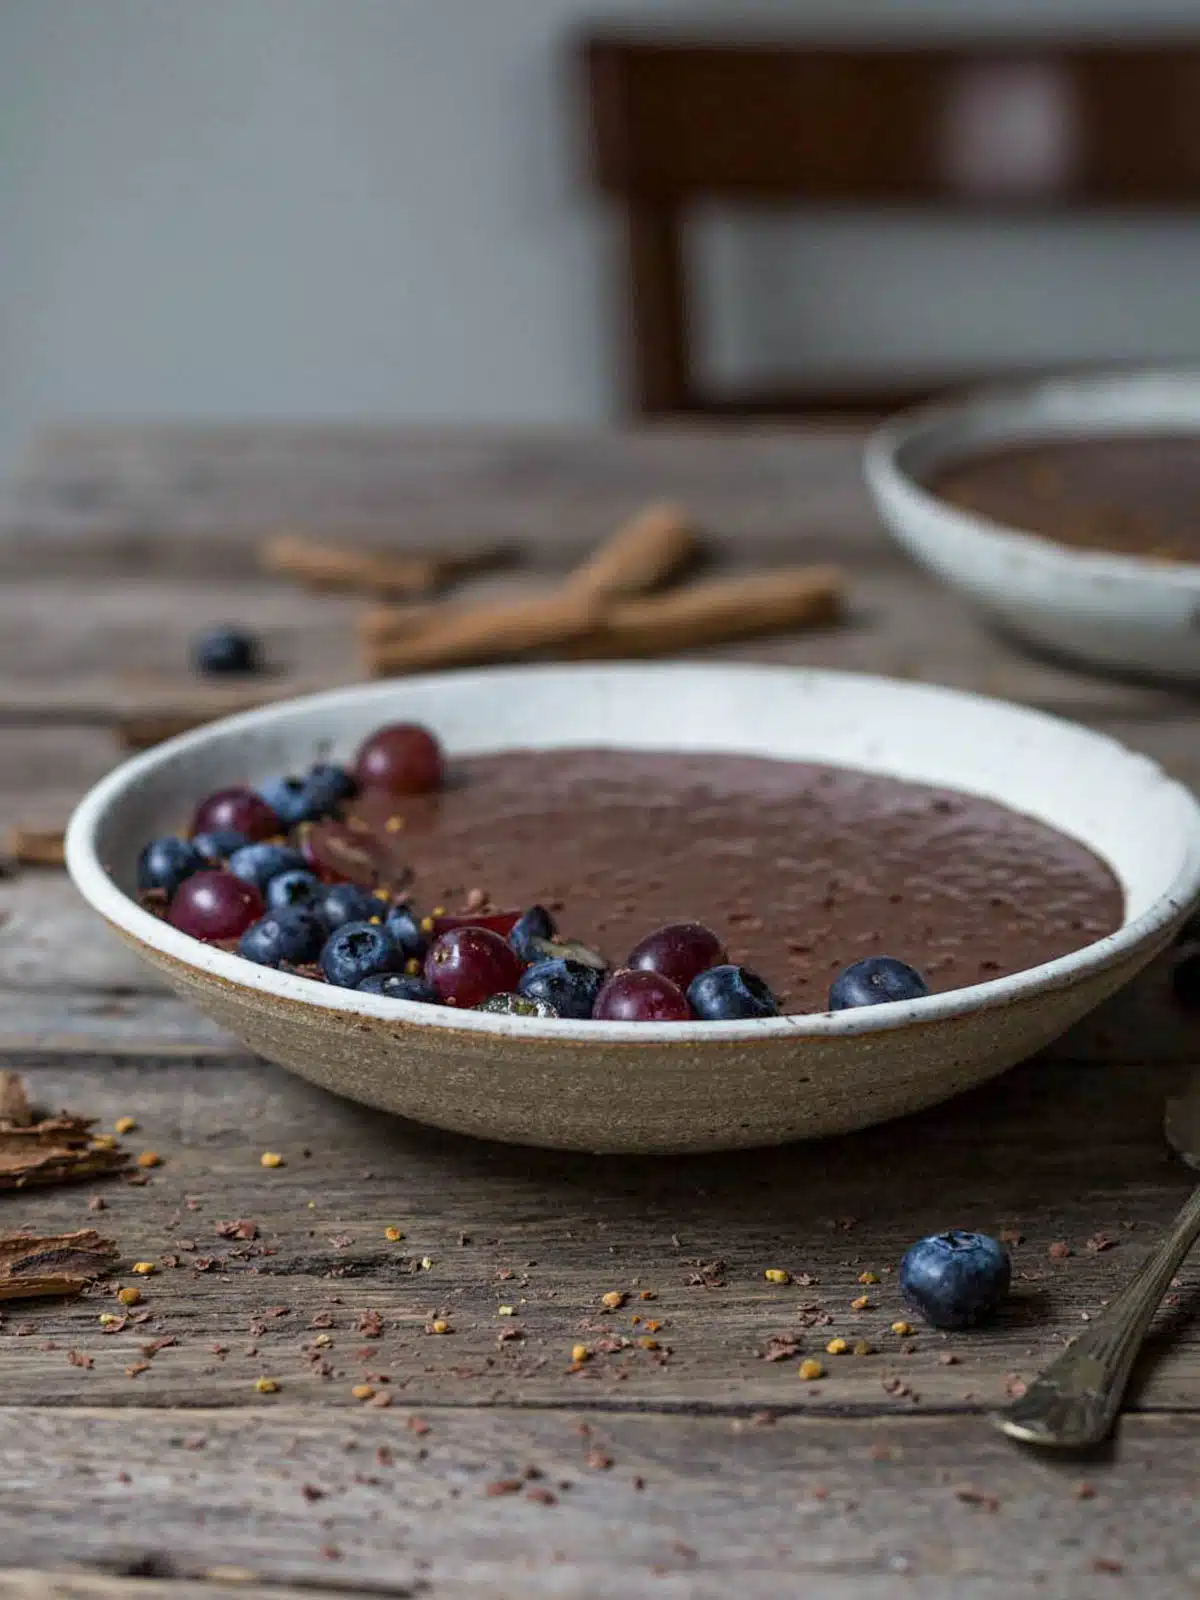 Bowls of chocolate pudding on a wooden table.